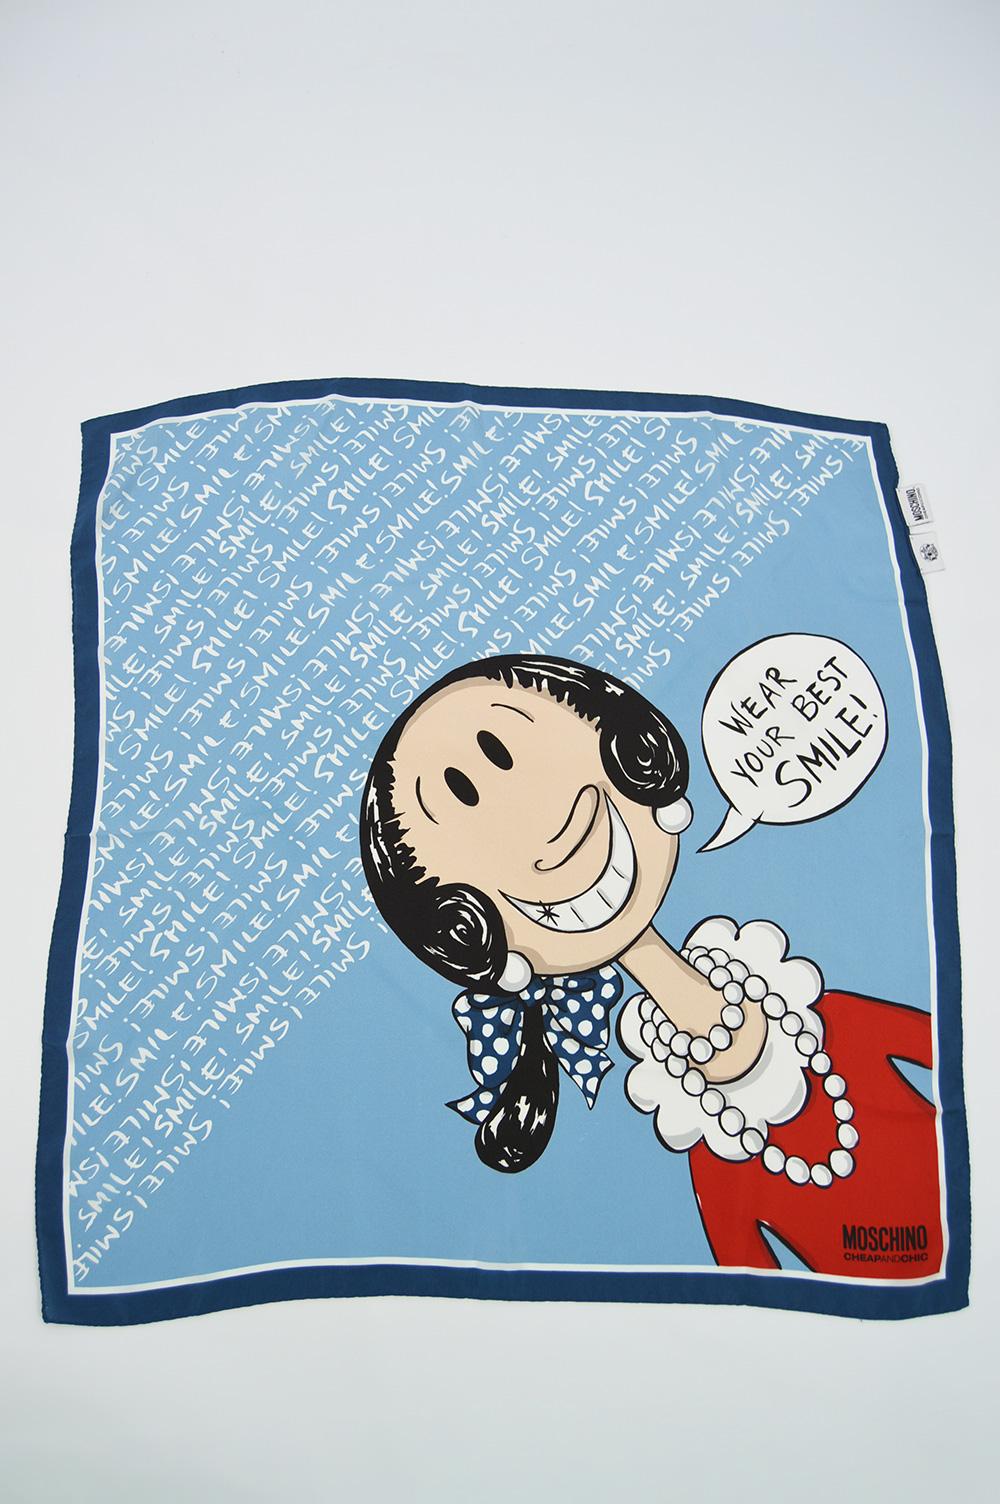 Size: Width - 25” / 63cm x Length  - 25” / 63cm

A fabulous and highly collectible women's silk scarf by luxury Italian fashion house, Moschino. Made in Italy, in a printed blue silk with hand rolled edges and a fun 'Olive Oyl' print from Popeye the